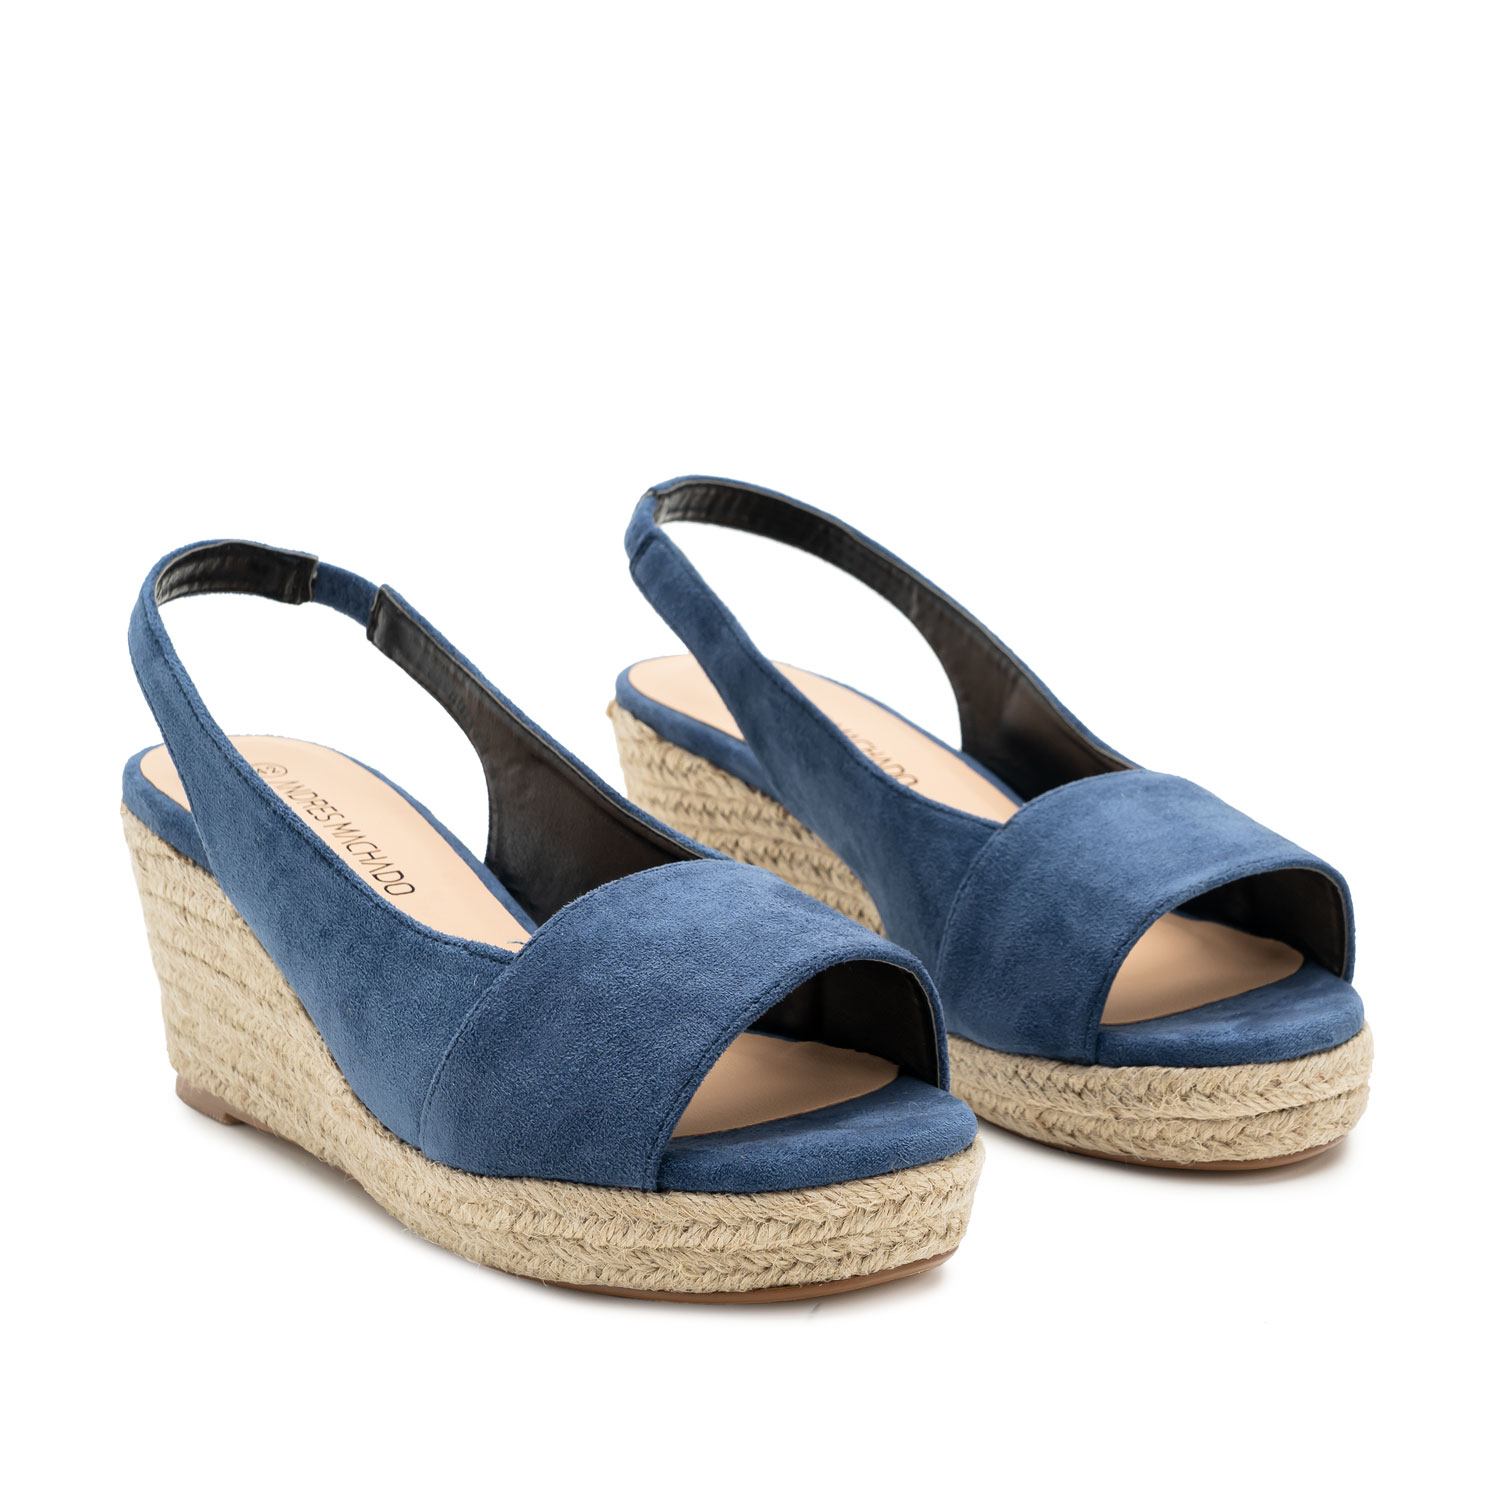 Navy Faux Suede Espadrilles with Jute Wedge 